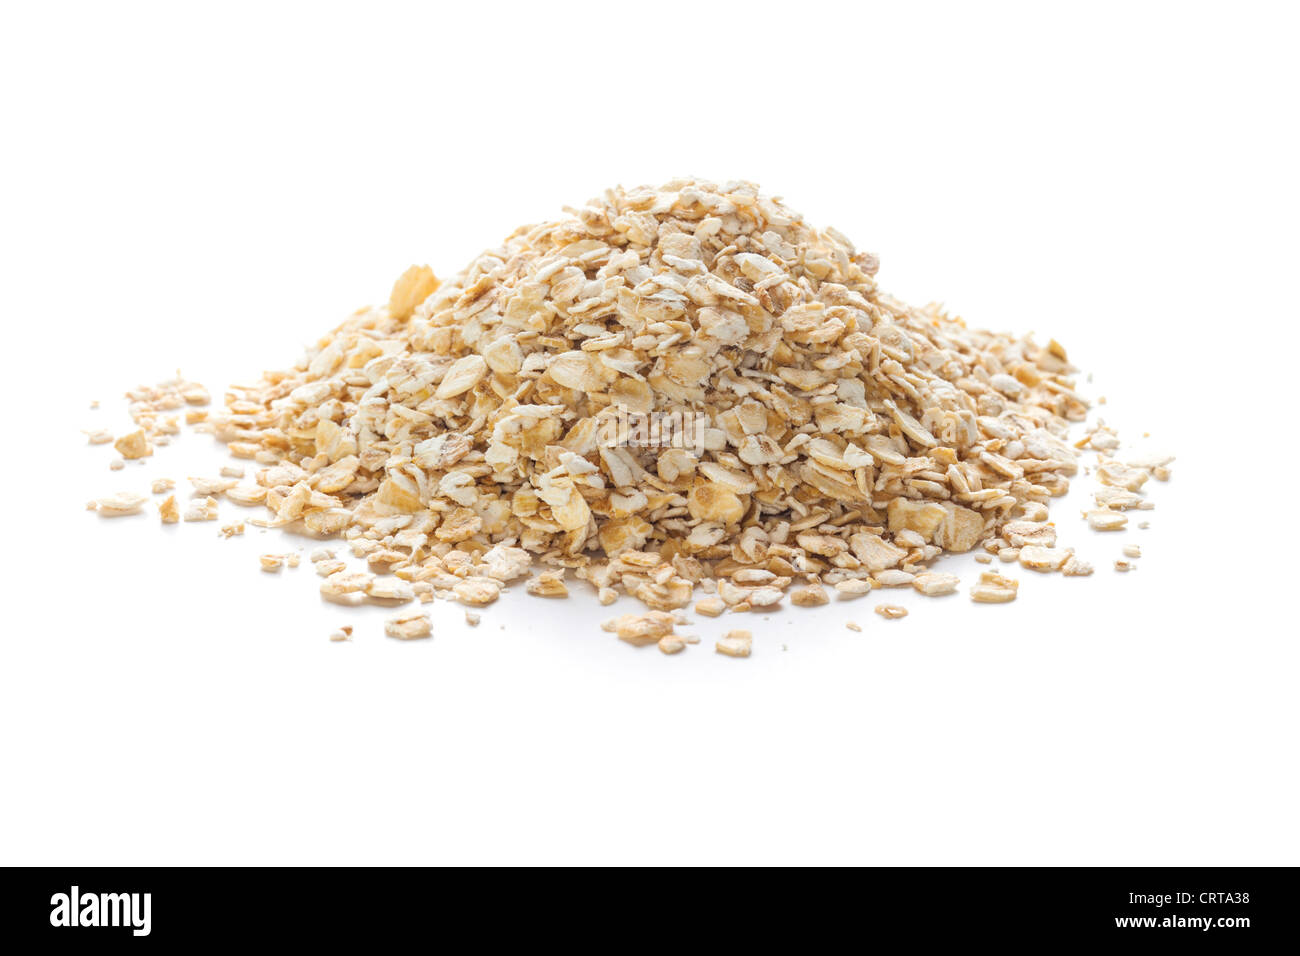 A pile of rolled oats on a white background with soft natural shadow. Stock Photo